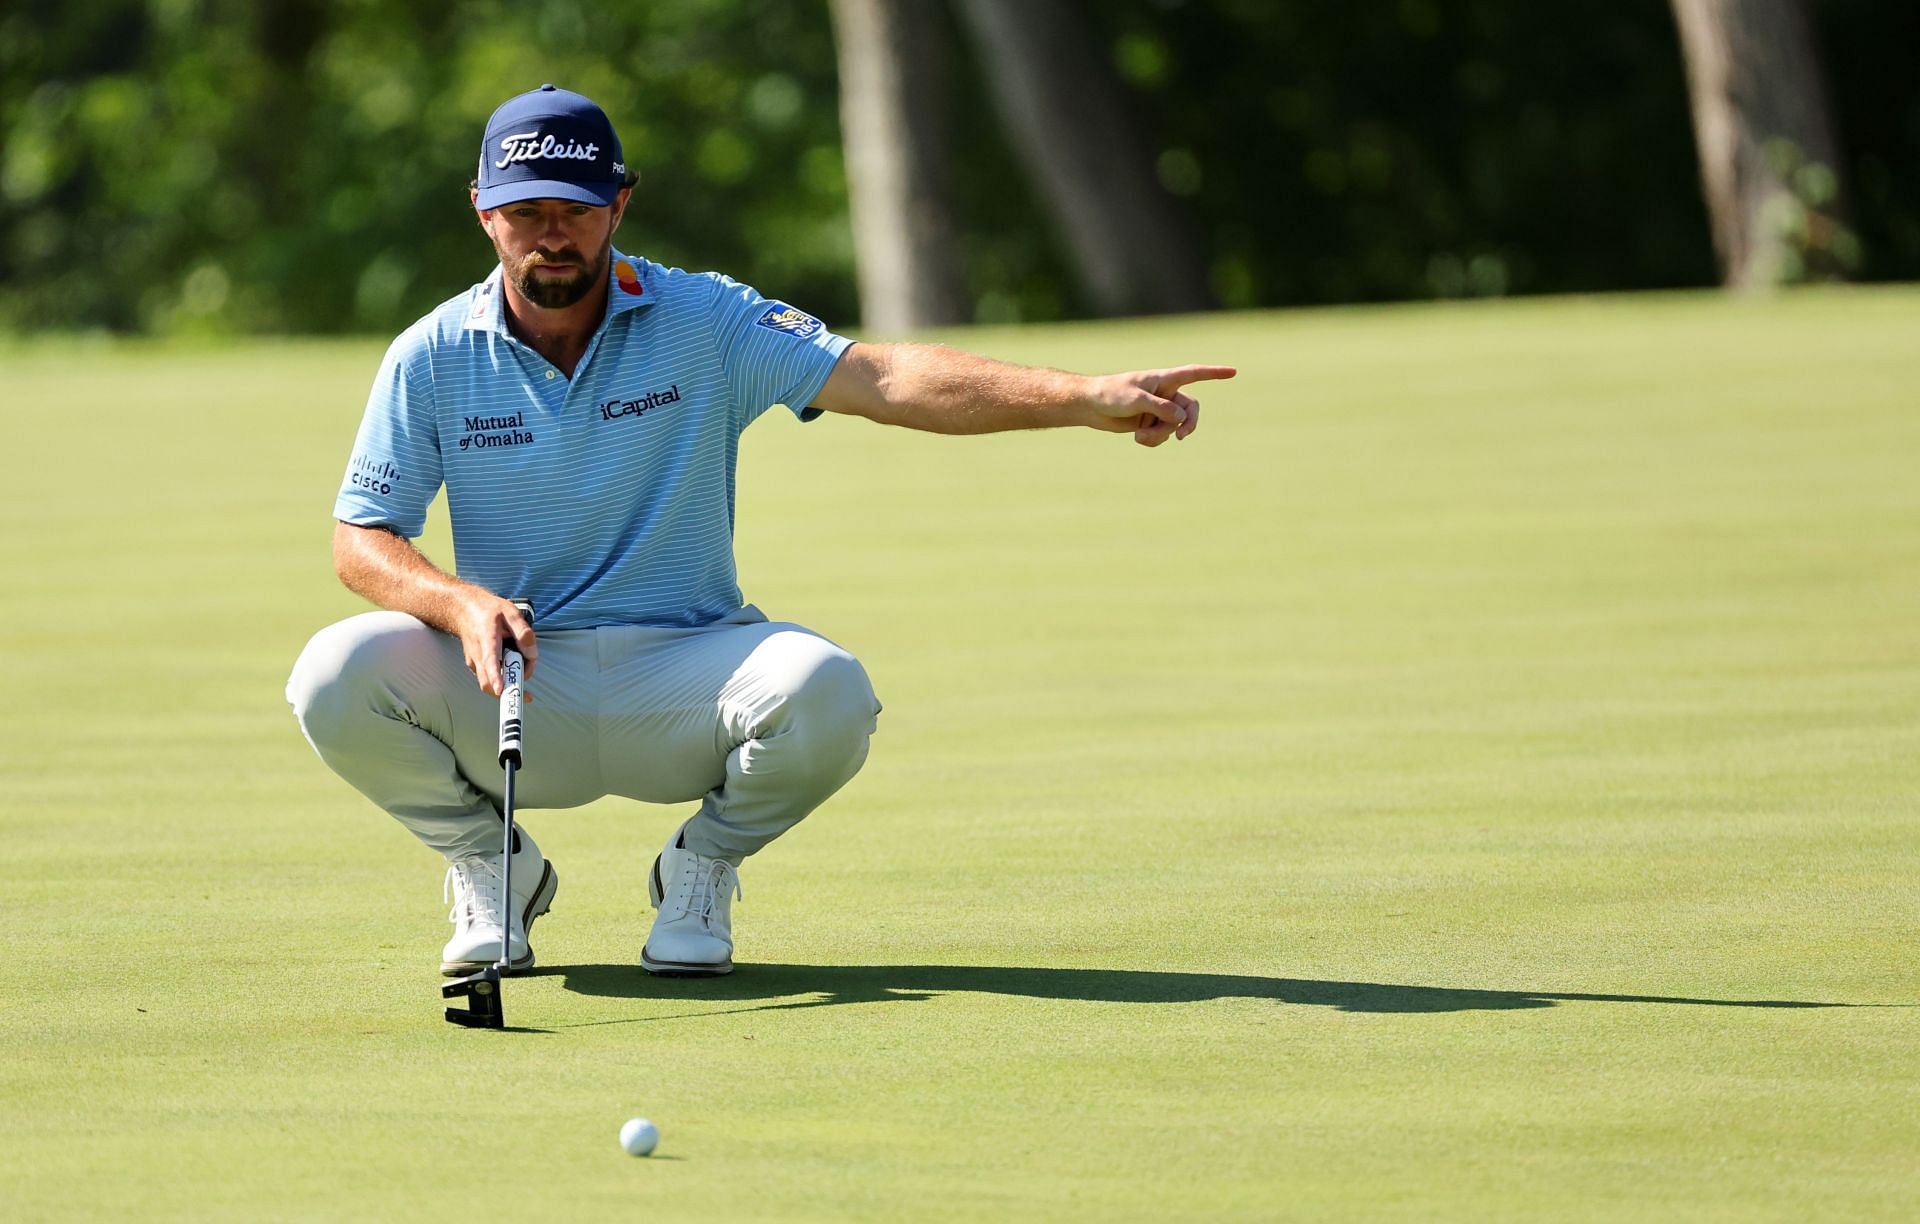 Cameron Young at the John Deere Classic - Round Two (Image via Getty).